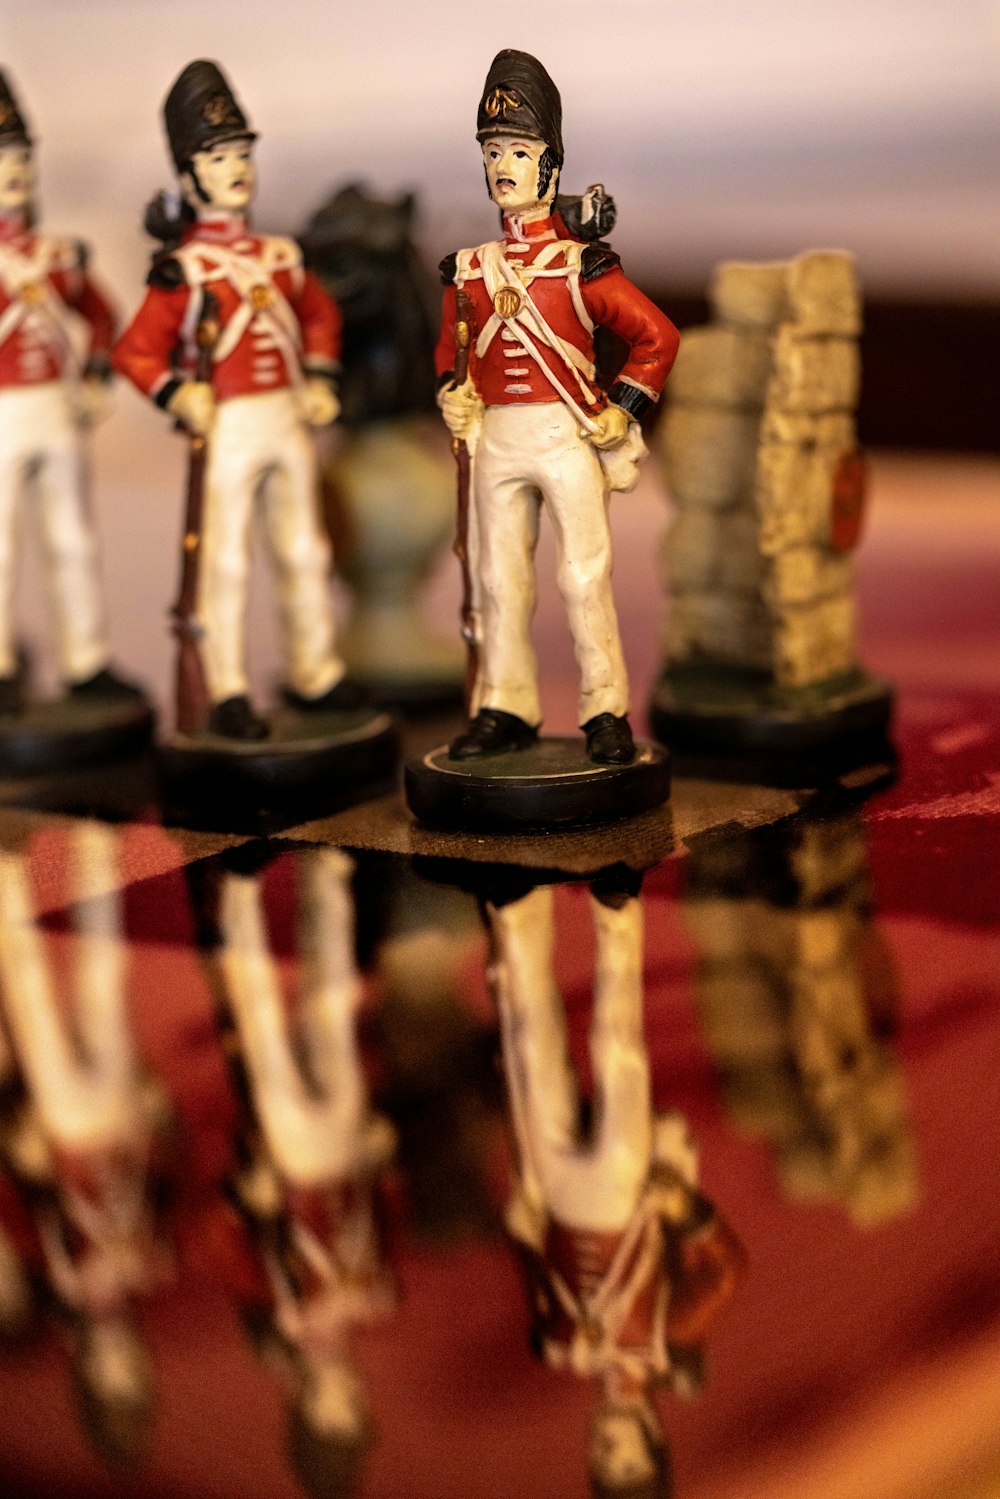 red and white soldier ceramic figurines